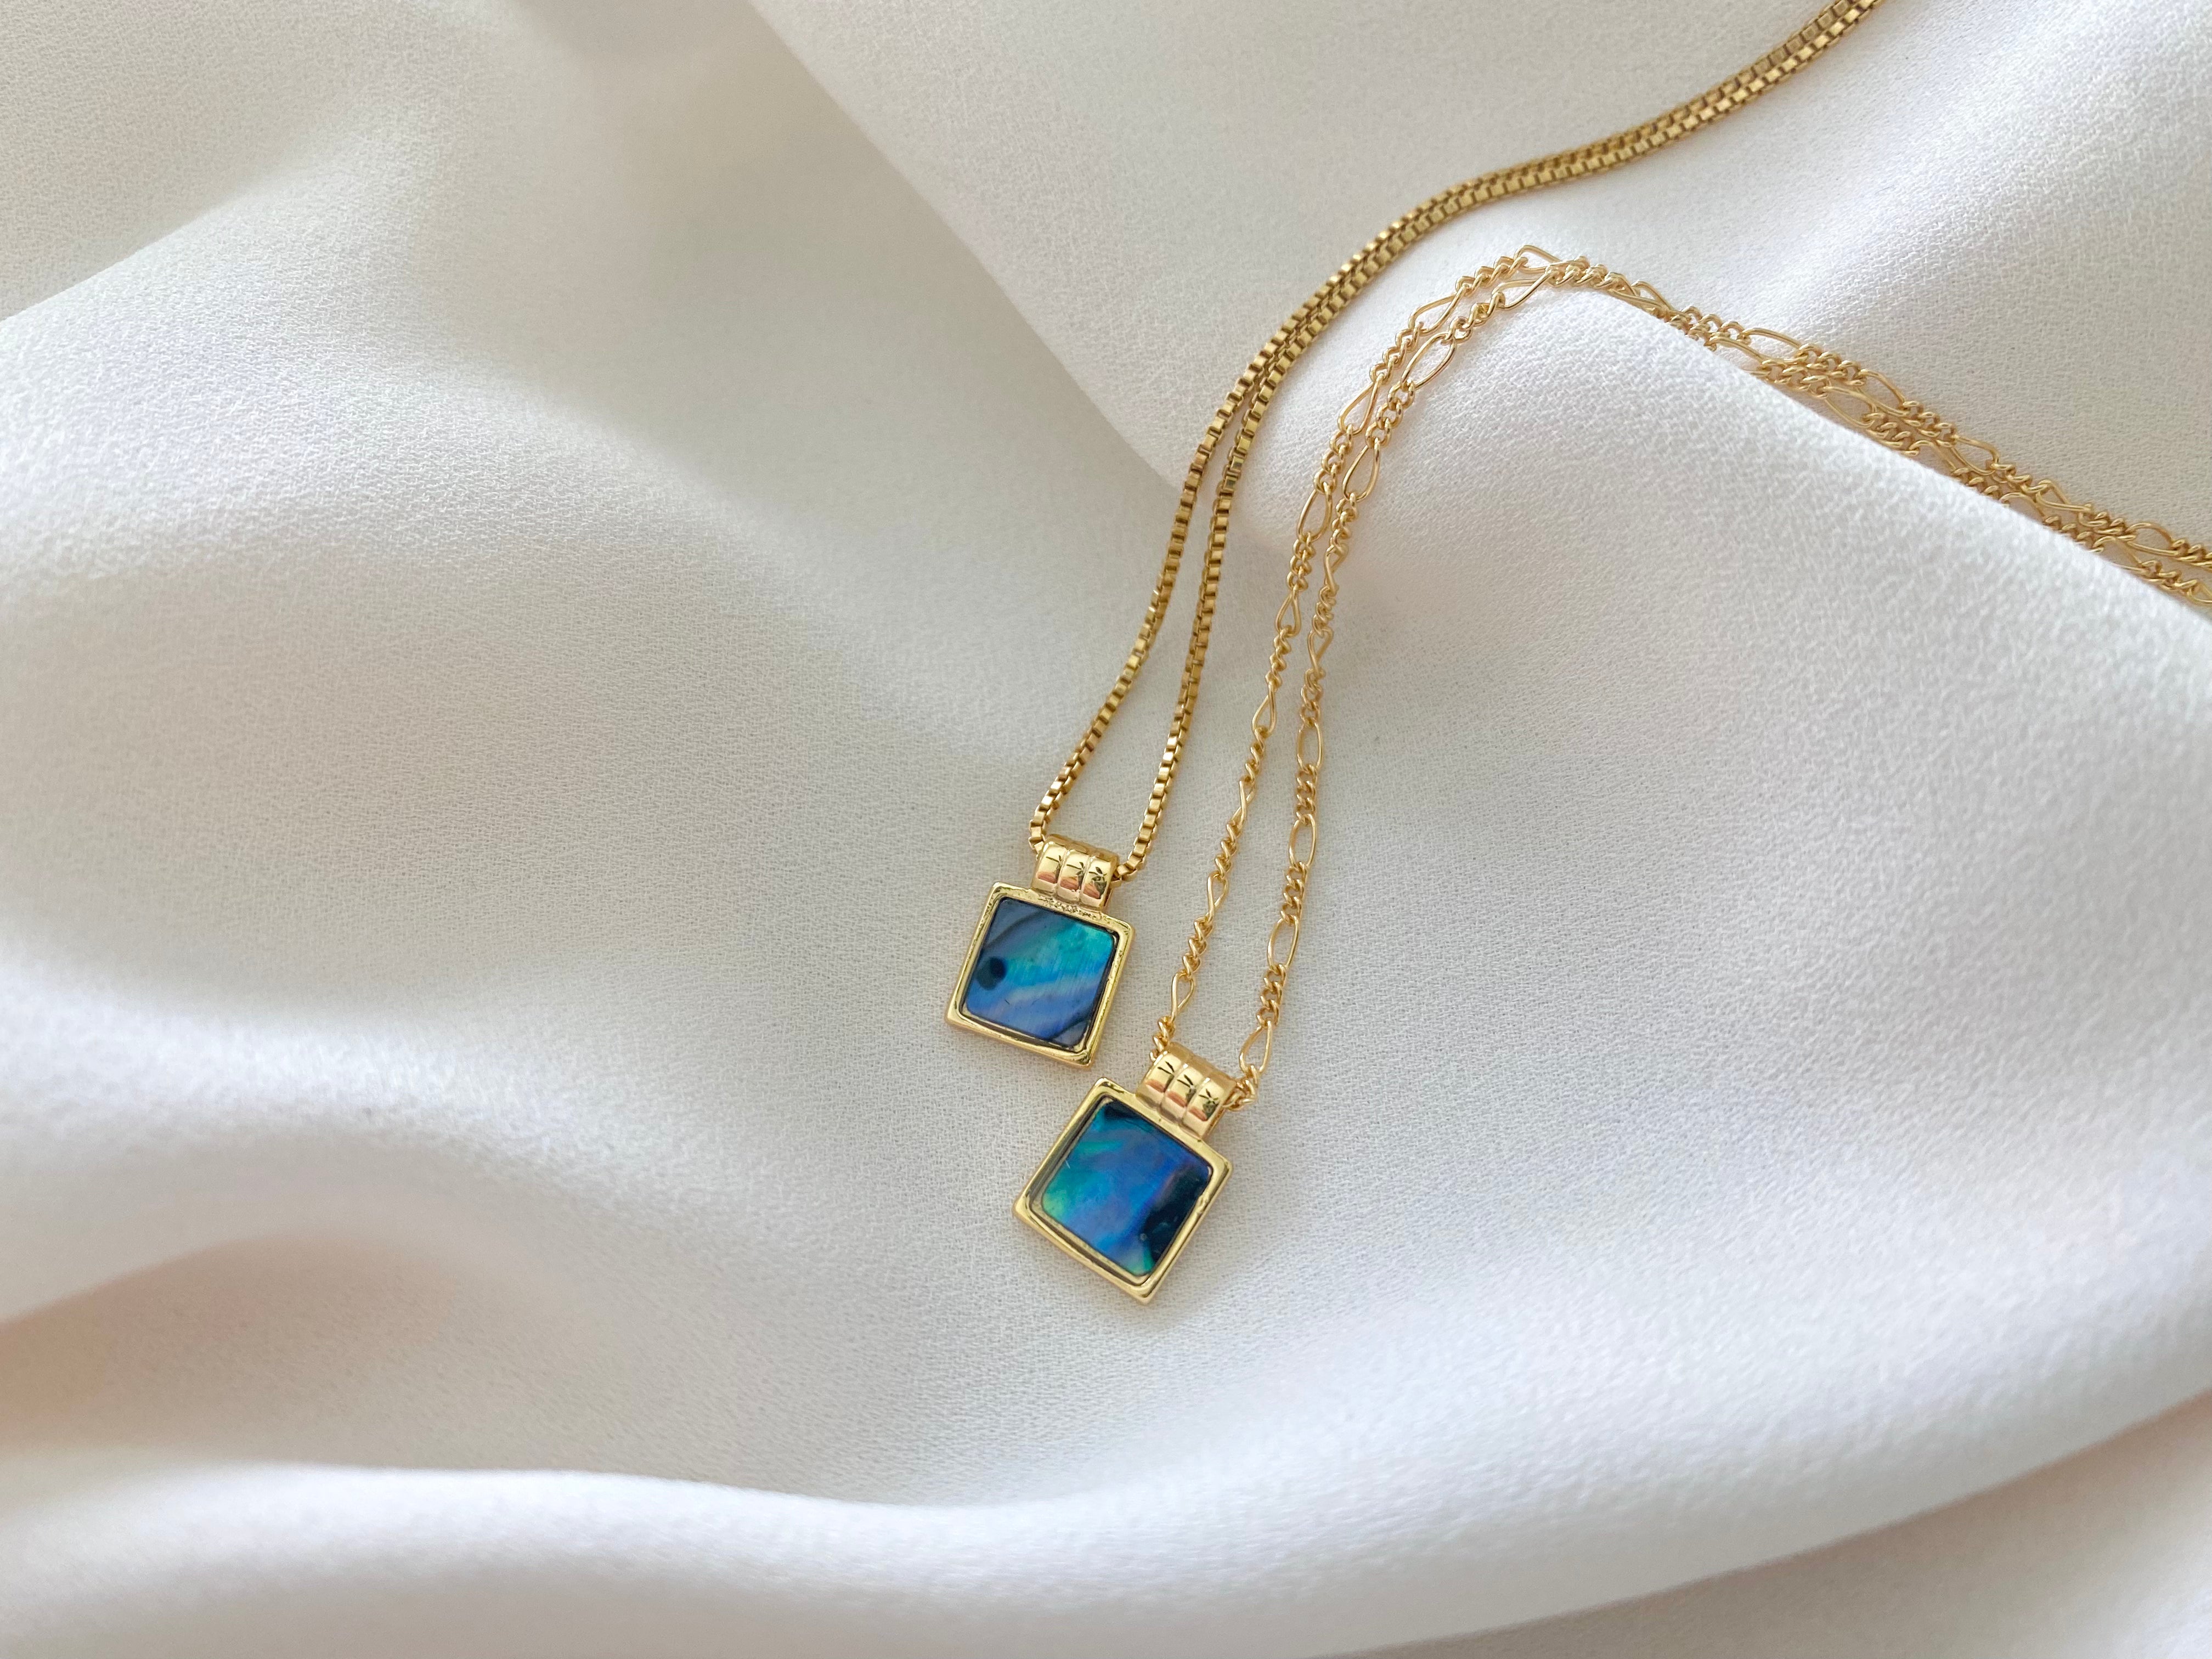 Dainty Square Shaped Abalone Pendant Necklace - Gold Filled - Beachy Jewelry